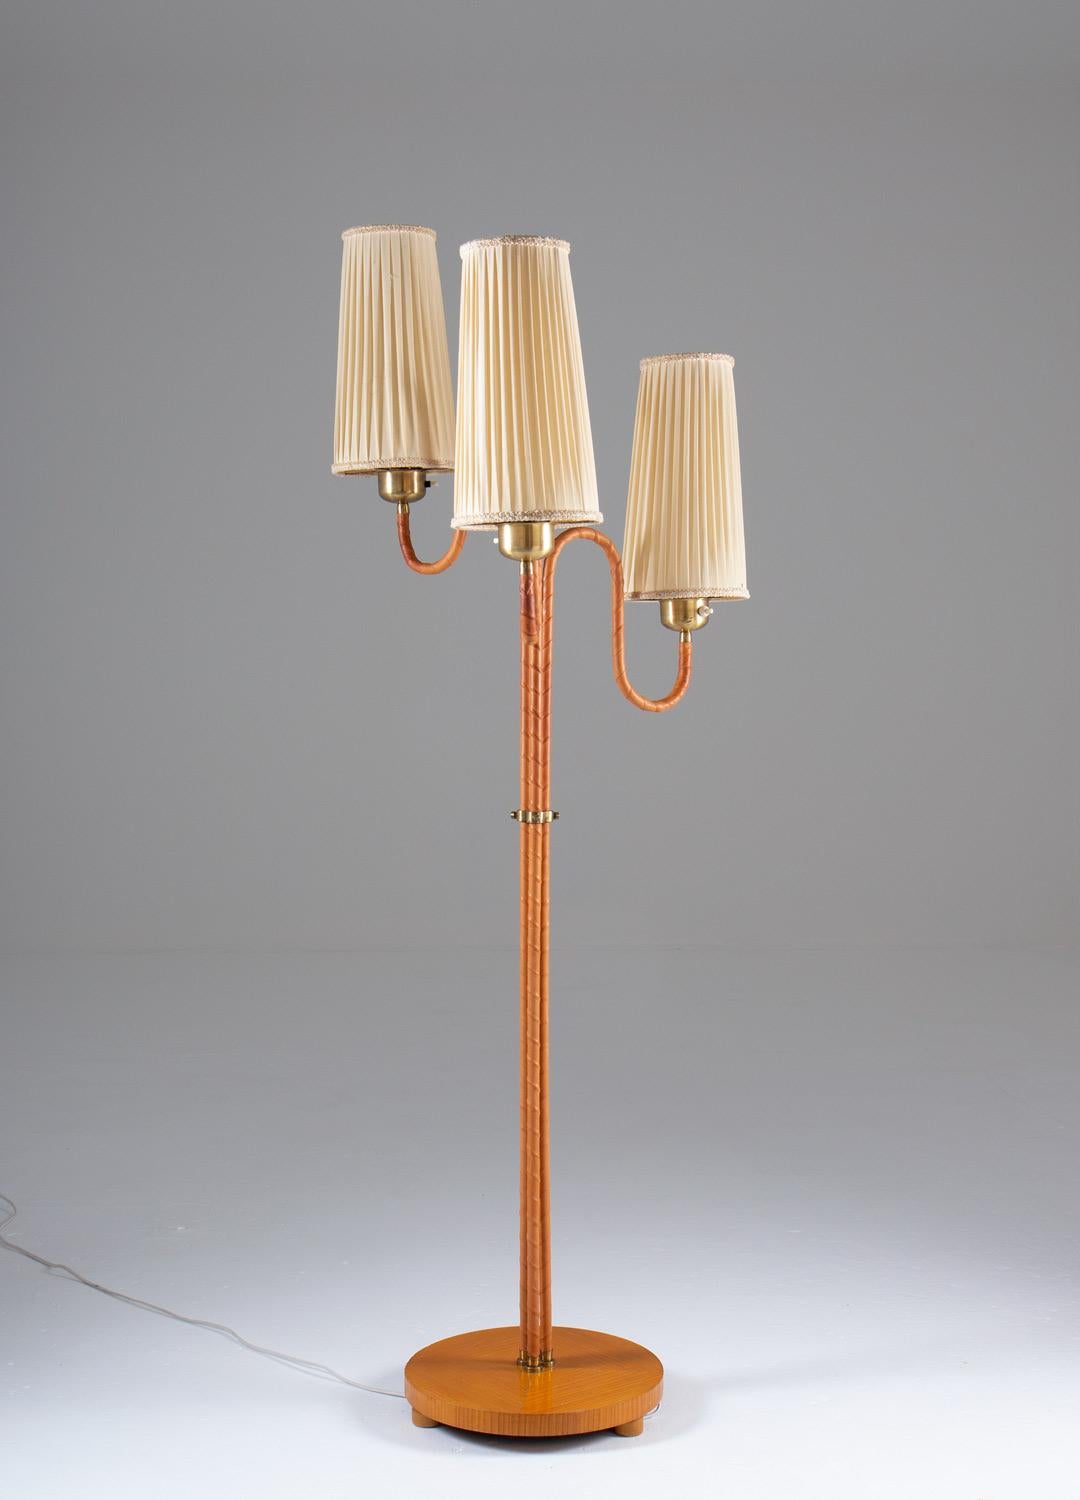 Rare floor lamp manufactured in Sweden, 1930-40s. 
This floor lamp consists of three leather webbed bases, connected by a brass divider and a wooden foot. Each base holds a light source, hidden by off-white fabric shades.

Condition: Good vintage